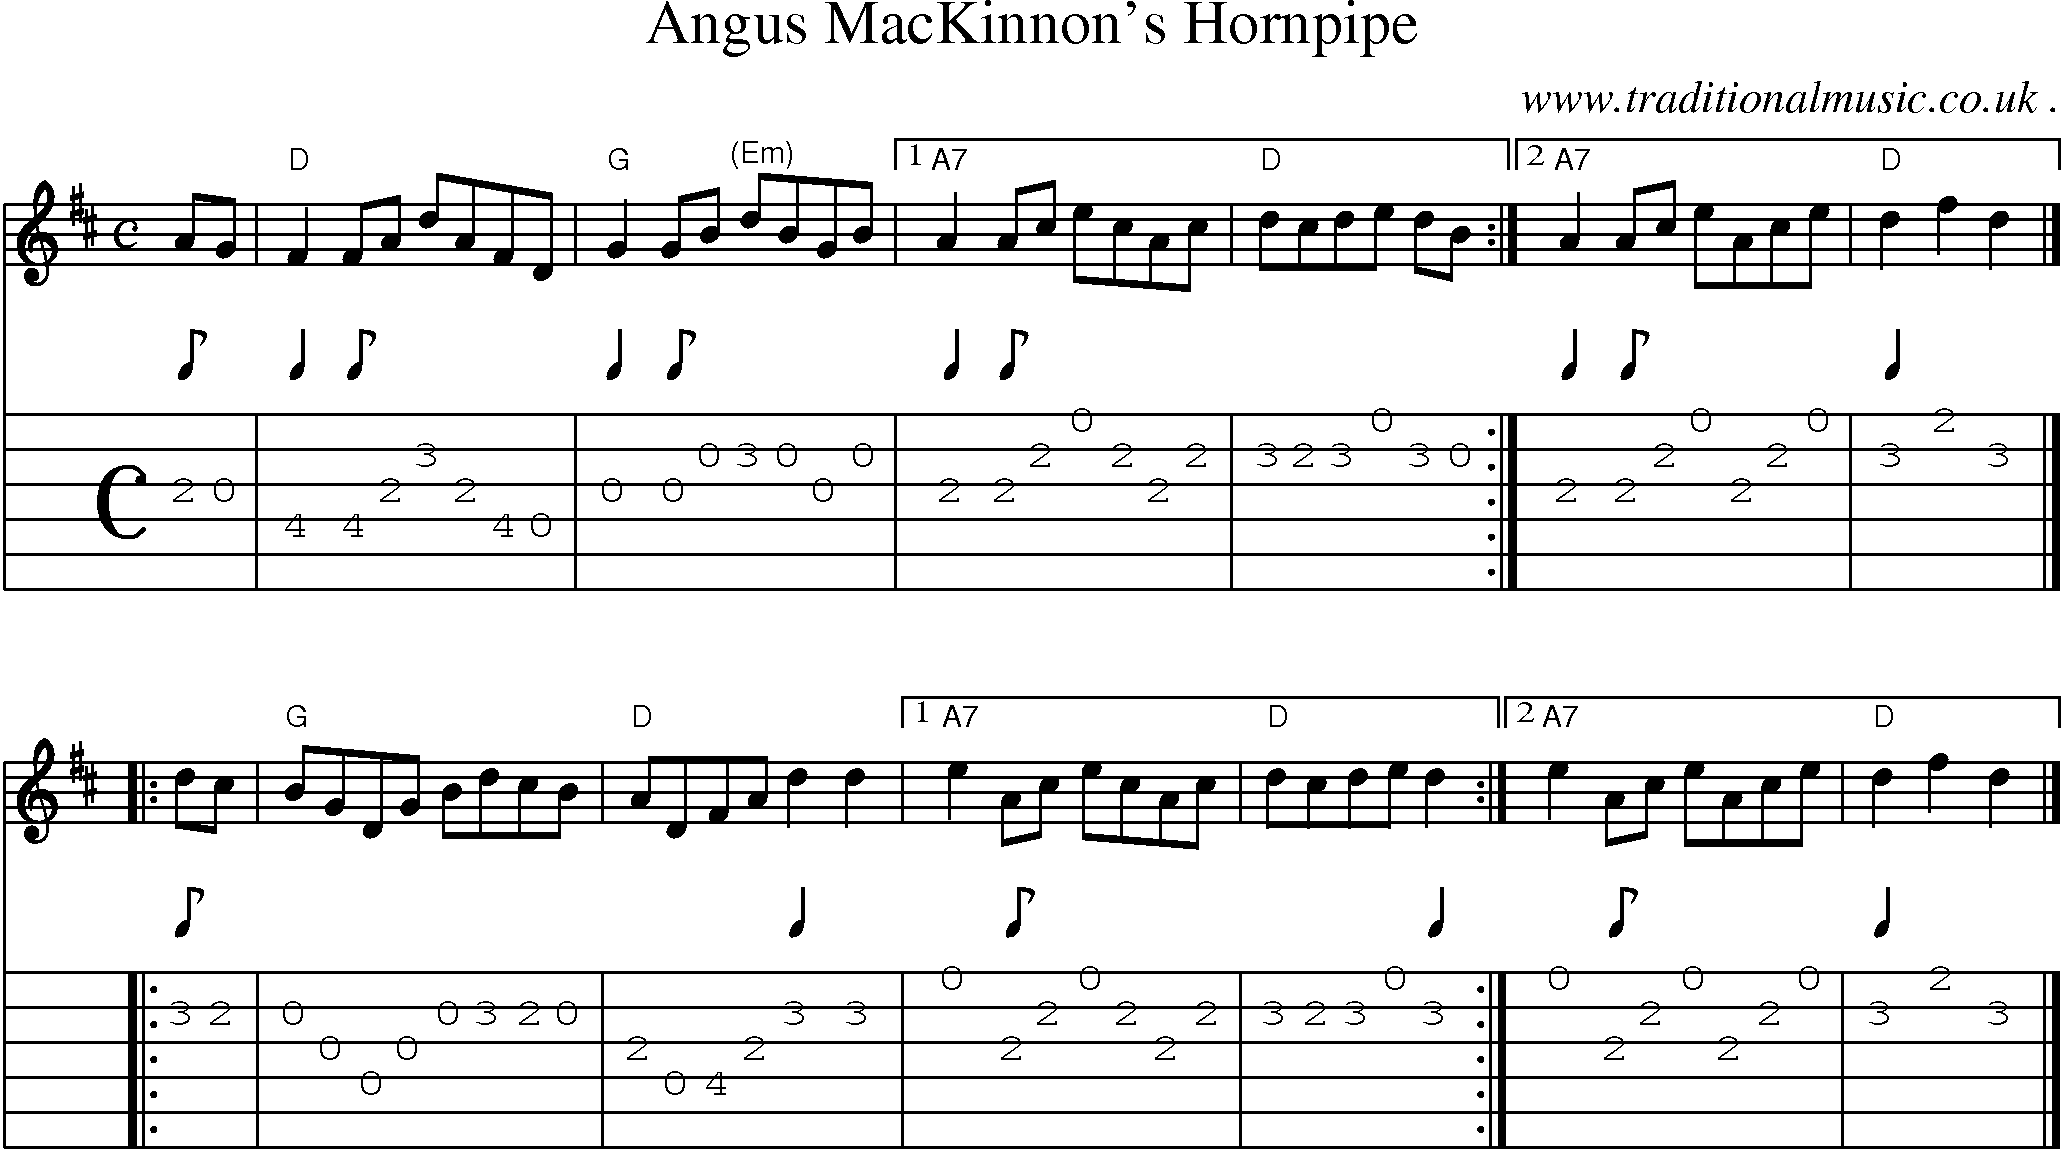 Sheet-music  score, Chords and Guitar Tabs for Angus Mackinnons Hornpipe